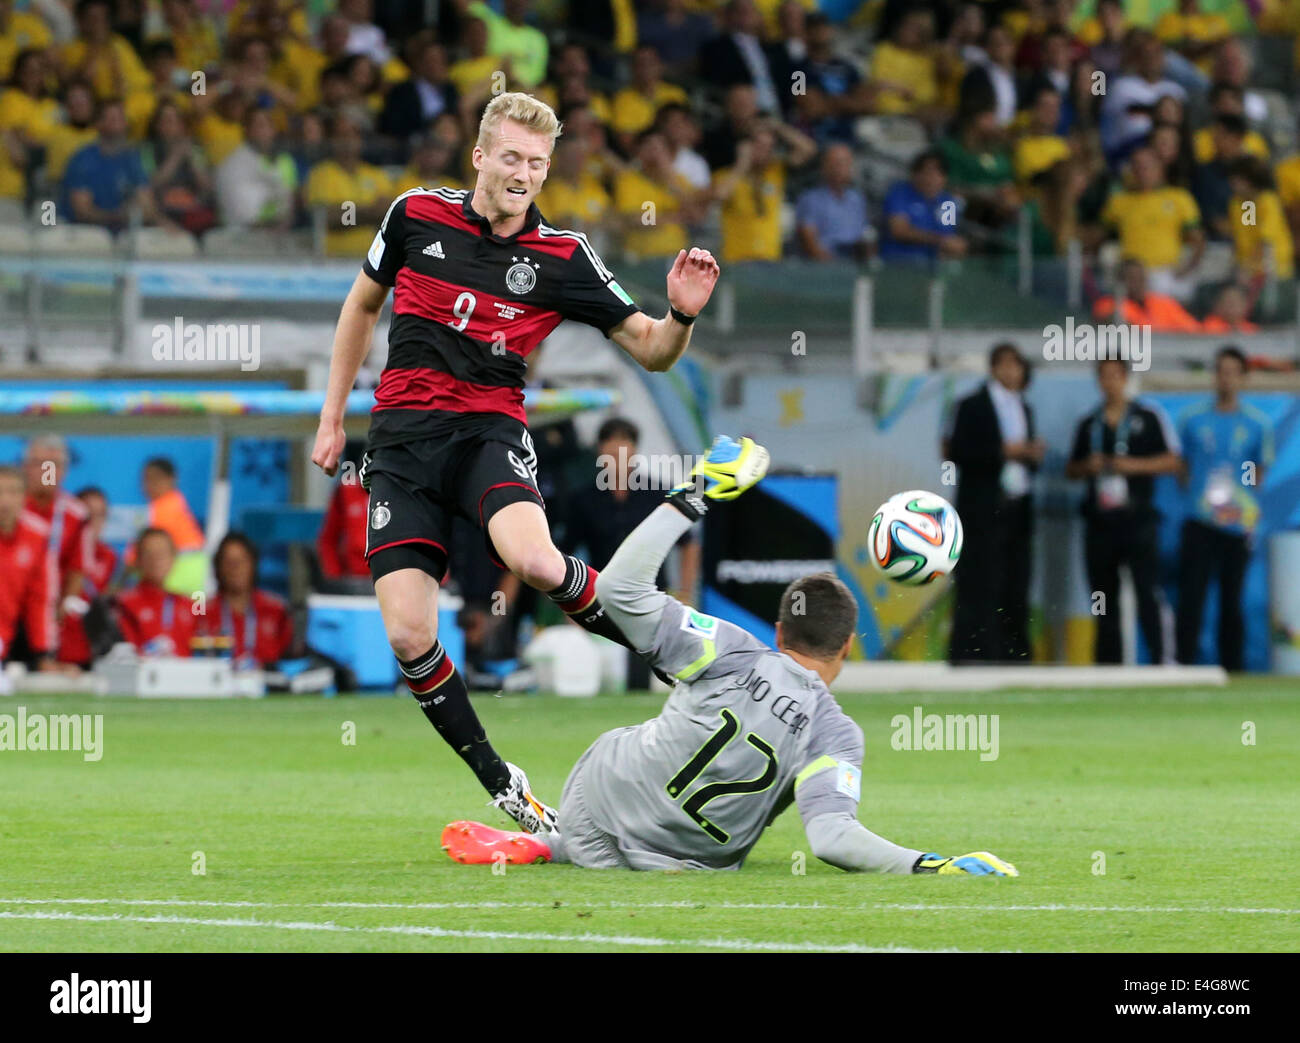 08.07.2014. Estadio Mineirao, Belo Horizonte, Brazil. FIFA World Cup 2014 semi-final soccer match between Brazil and Germany at Estadio Mineirao. Julio Cesar is beaten by the shot from Schuerrle Stock Photo